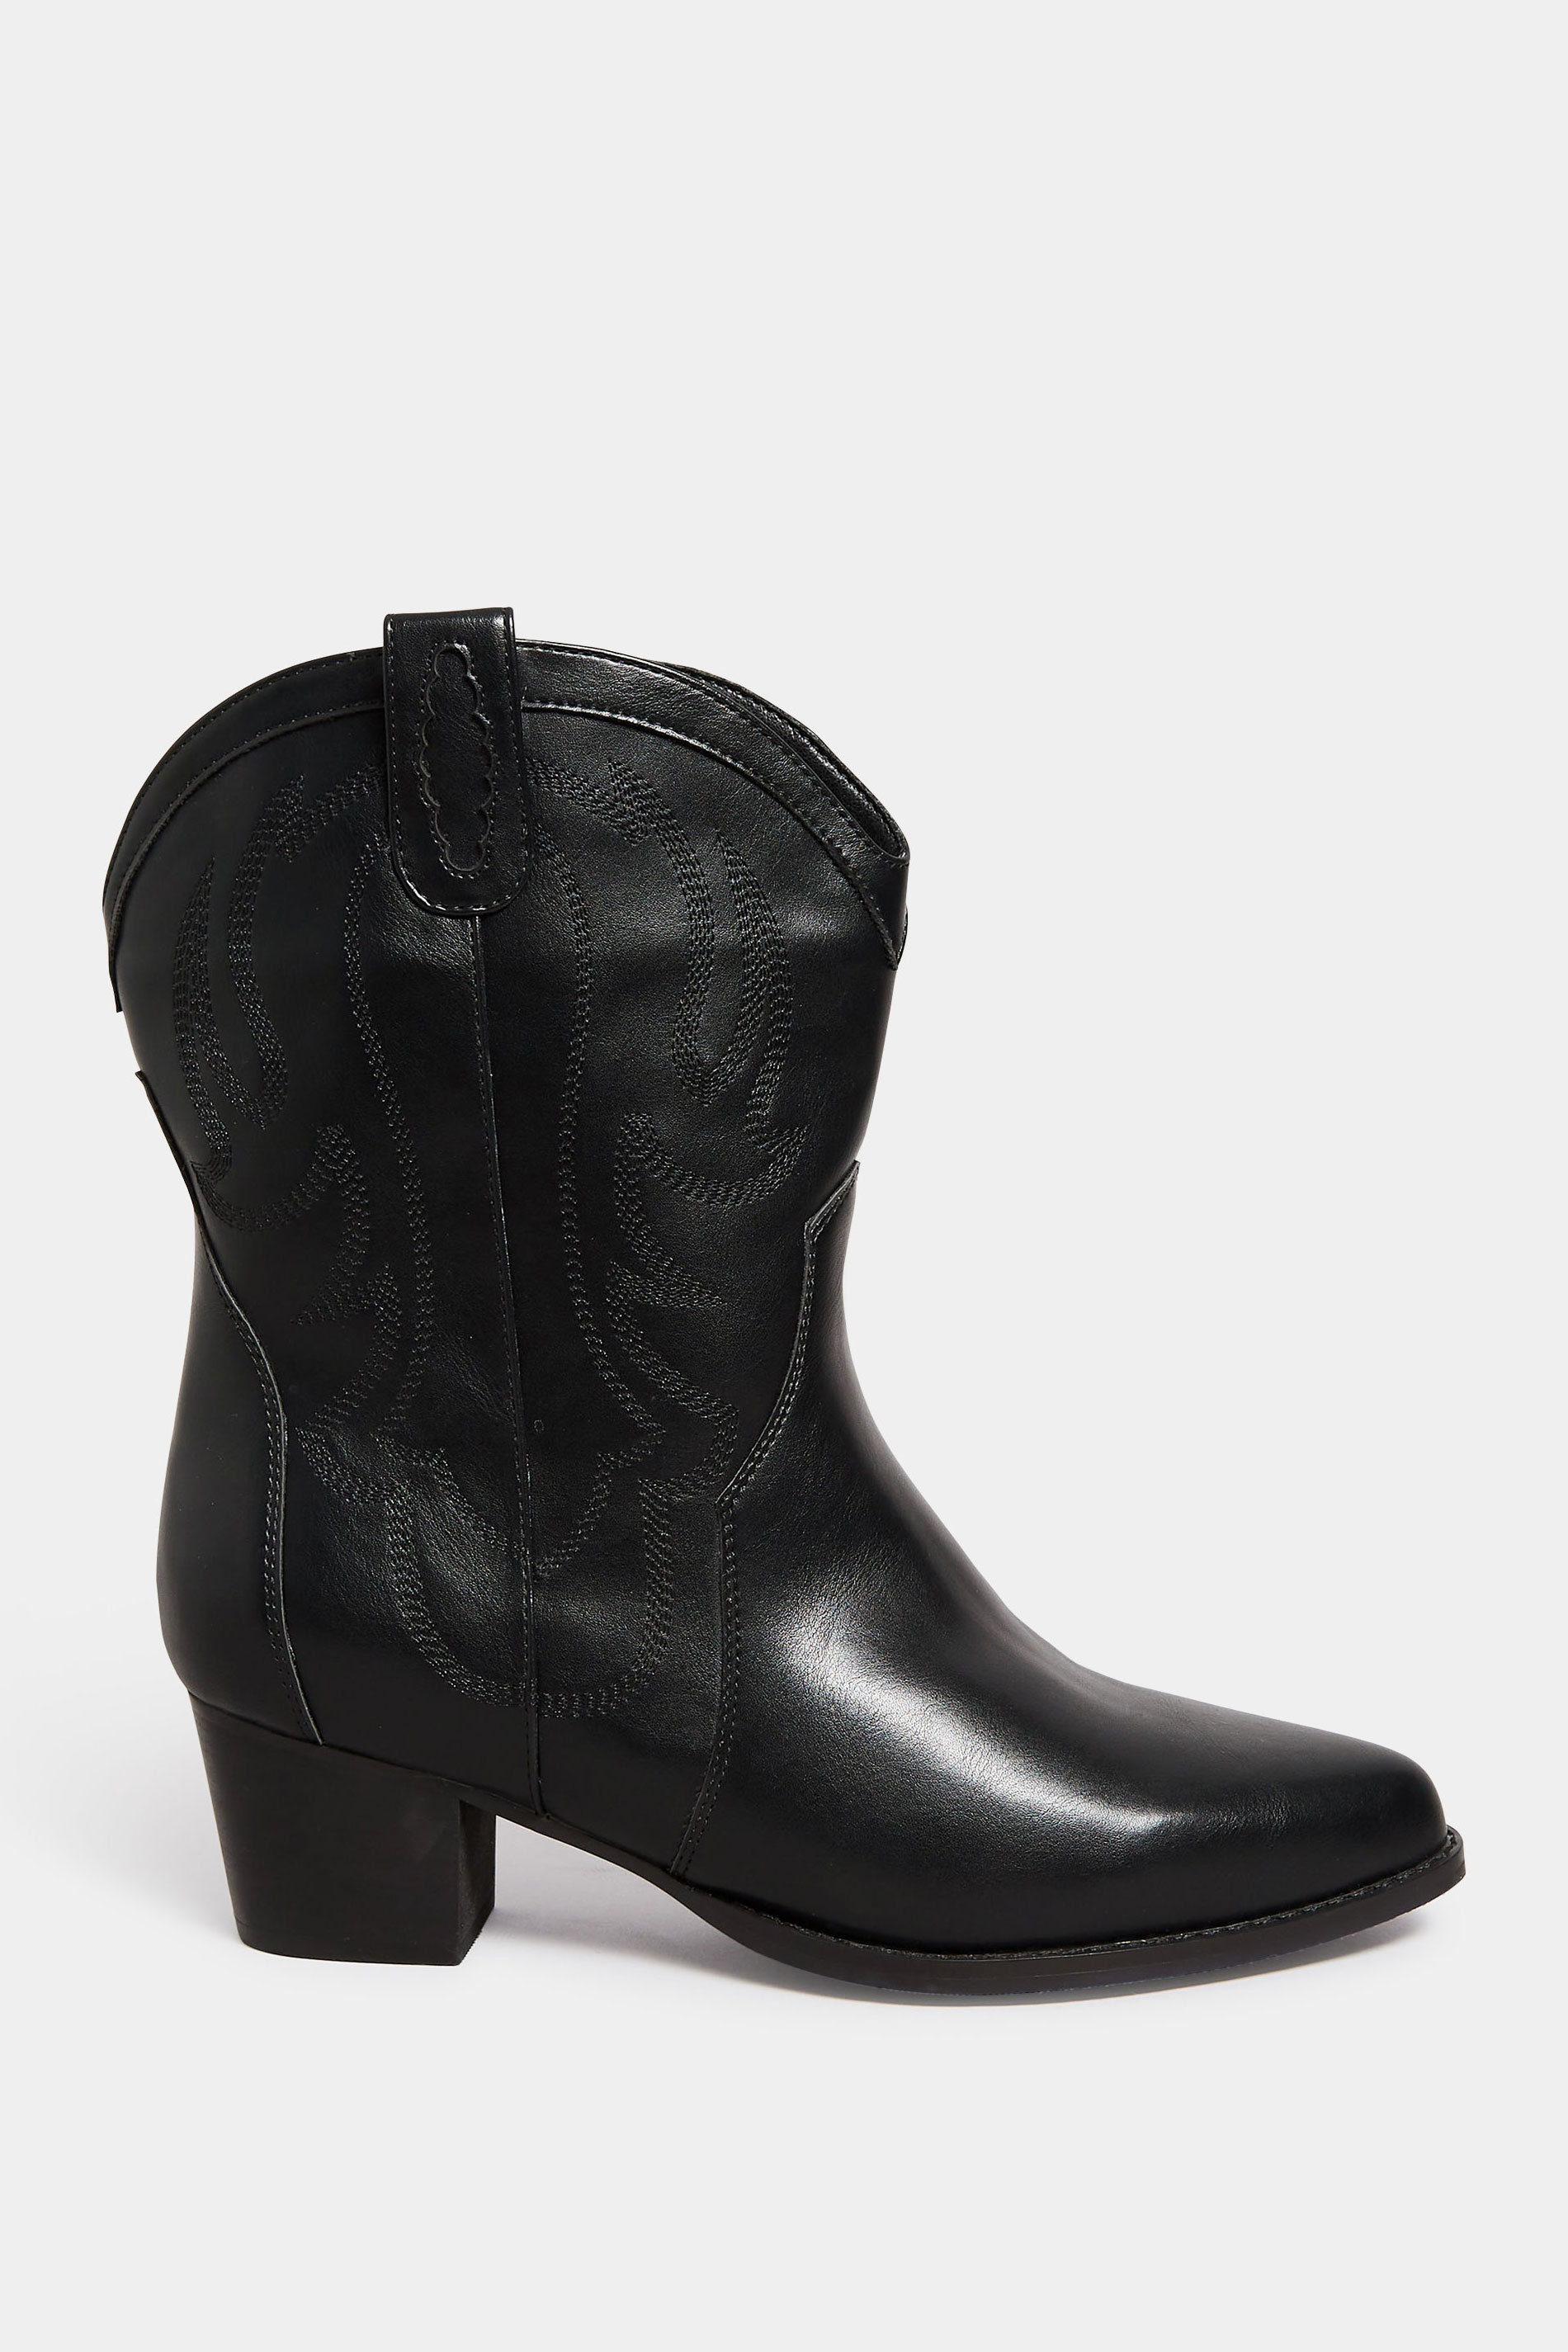 LIMITED COLLECTION Black Cowboy Ankle Boots in Extra Wide EEE Fit | Yours Clothing 3